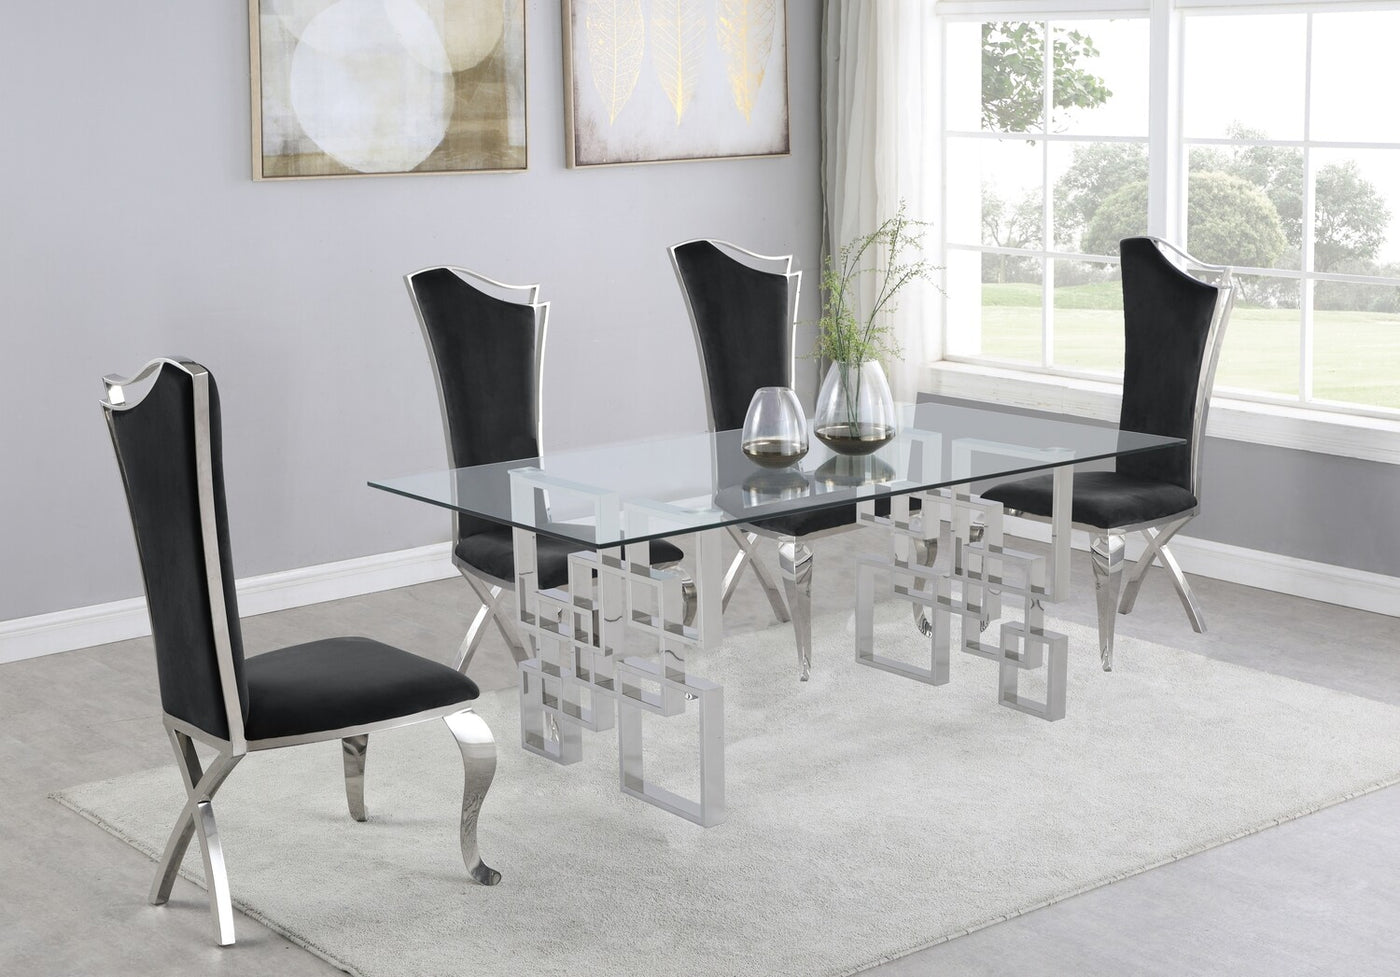 Muhammad Glass Table with Black Chairs – Fully Furnished